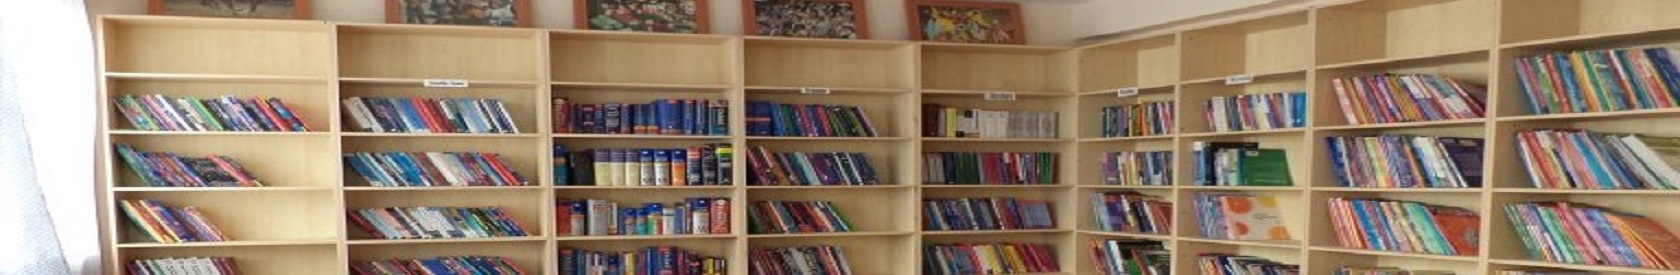 The library of RWDOA’s Training Center at Gowharshad Bigom High School of Herat province